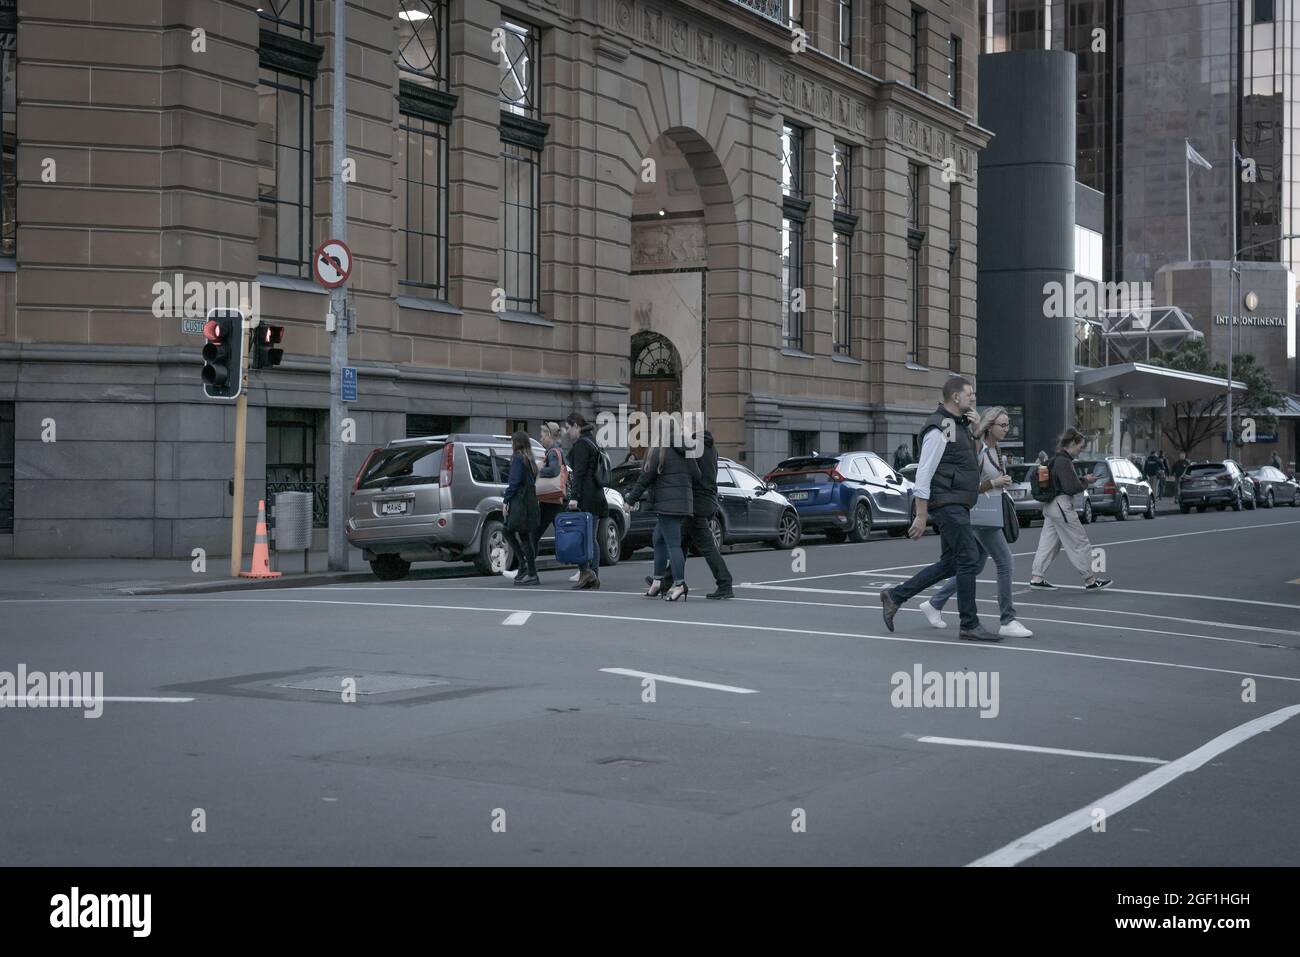 Wellington New Zealand - July 30 2021; Grainy old world style urban street scene with couple crossing outside Old Bank Building on intersection of Cus Stock Photo